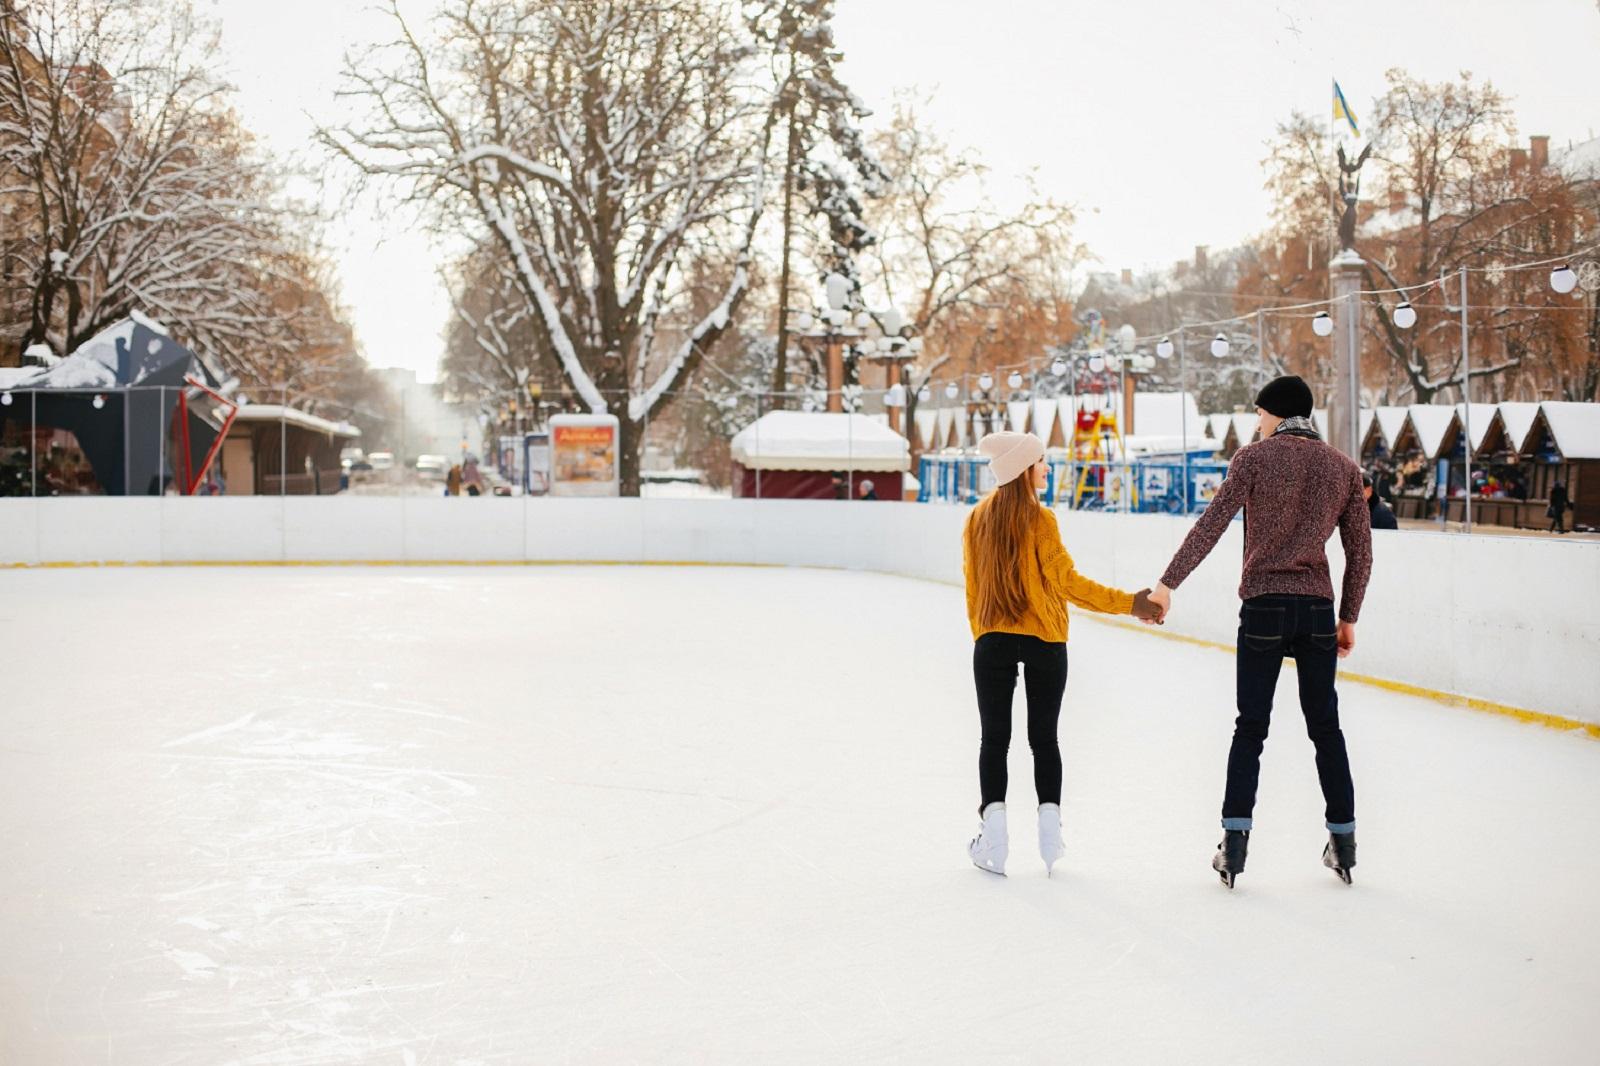 A Romantic Morning Spent Ice Skating in the New York Winter